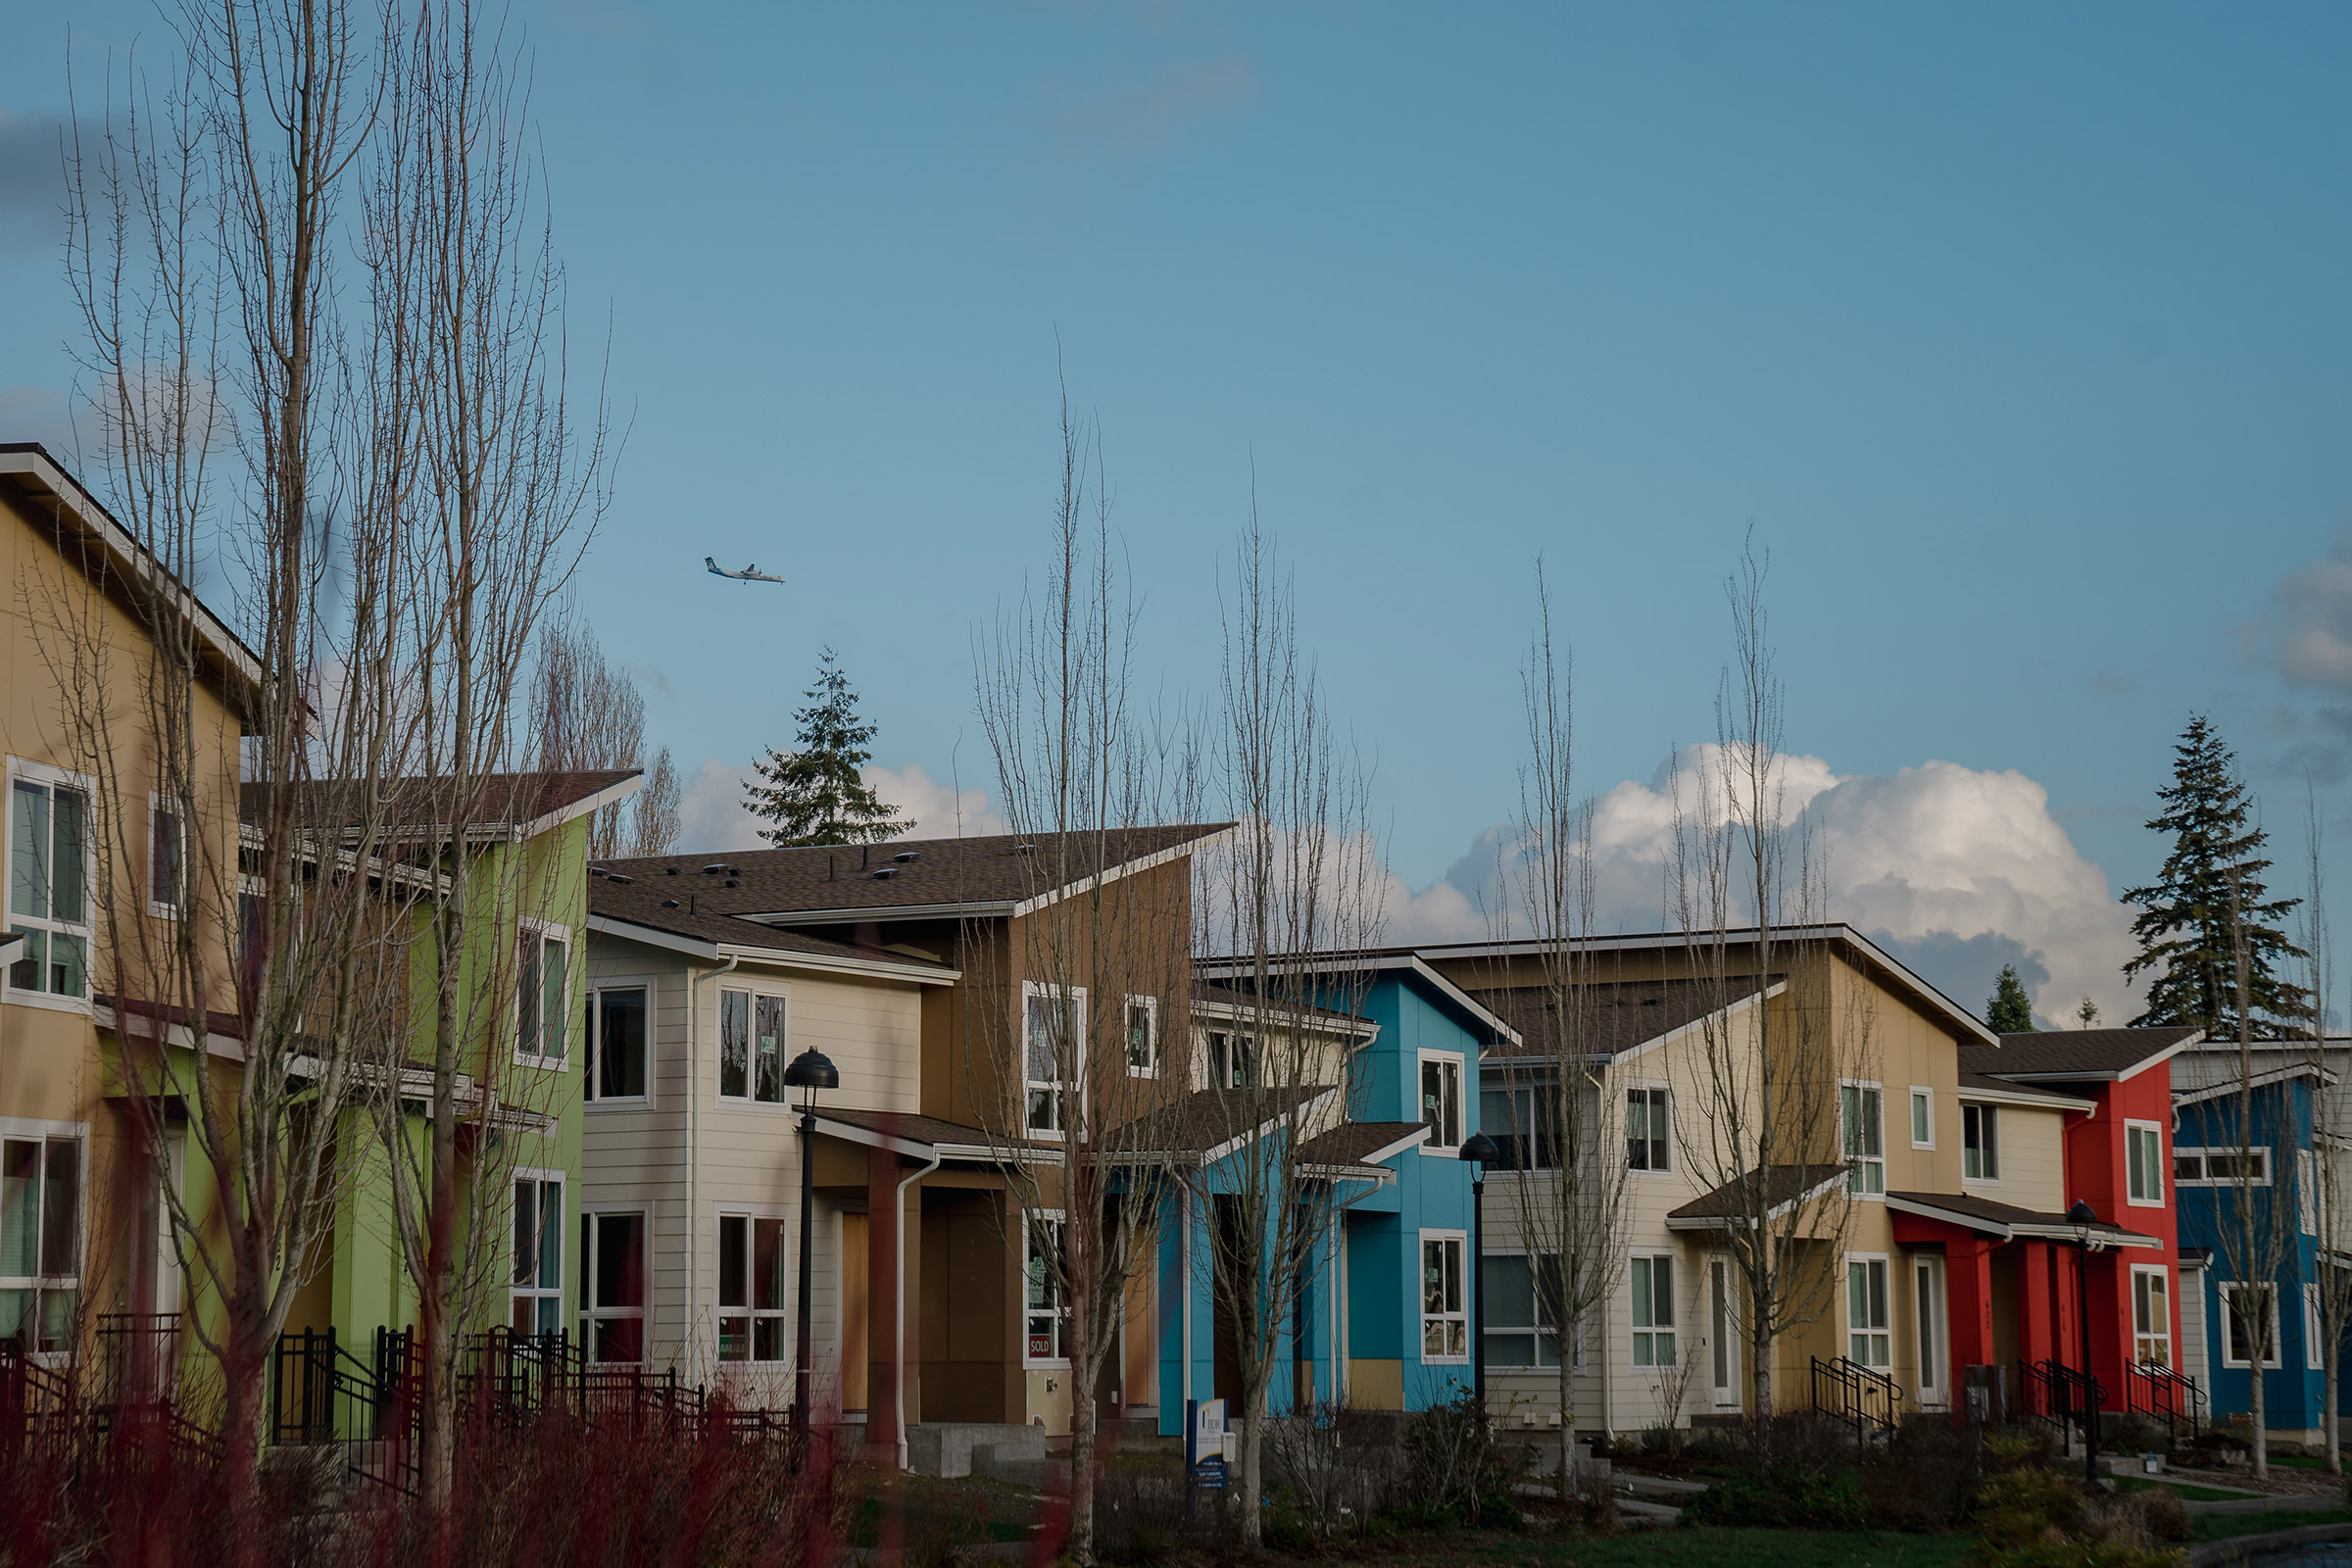 Greenbridge, a mixed-income community near Seattle, offers a model for reimagining public housing.